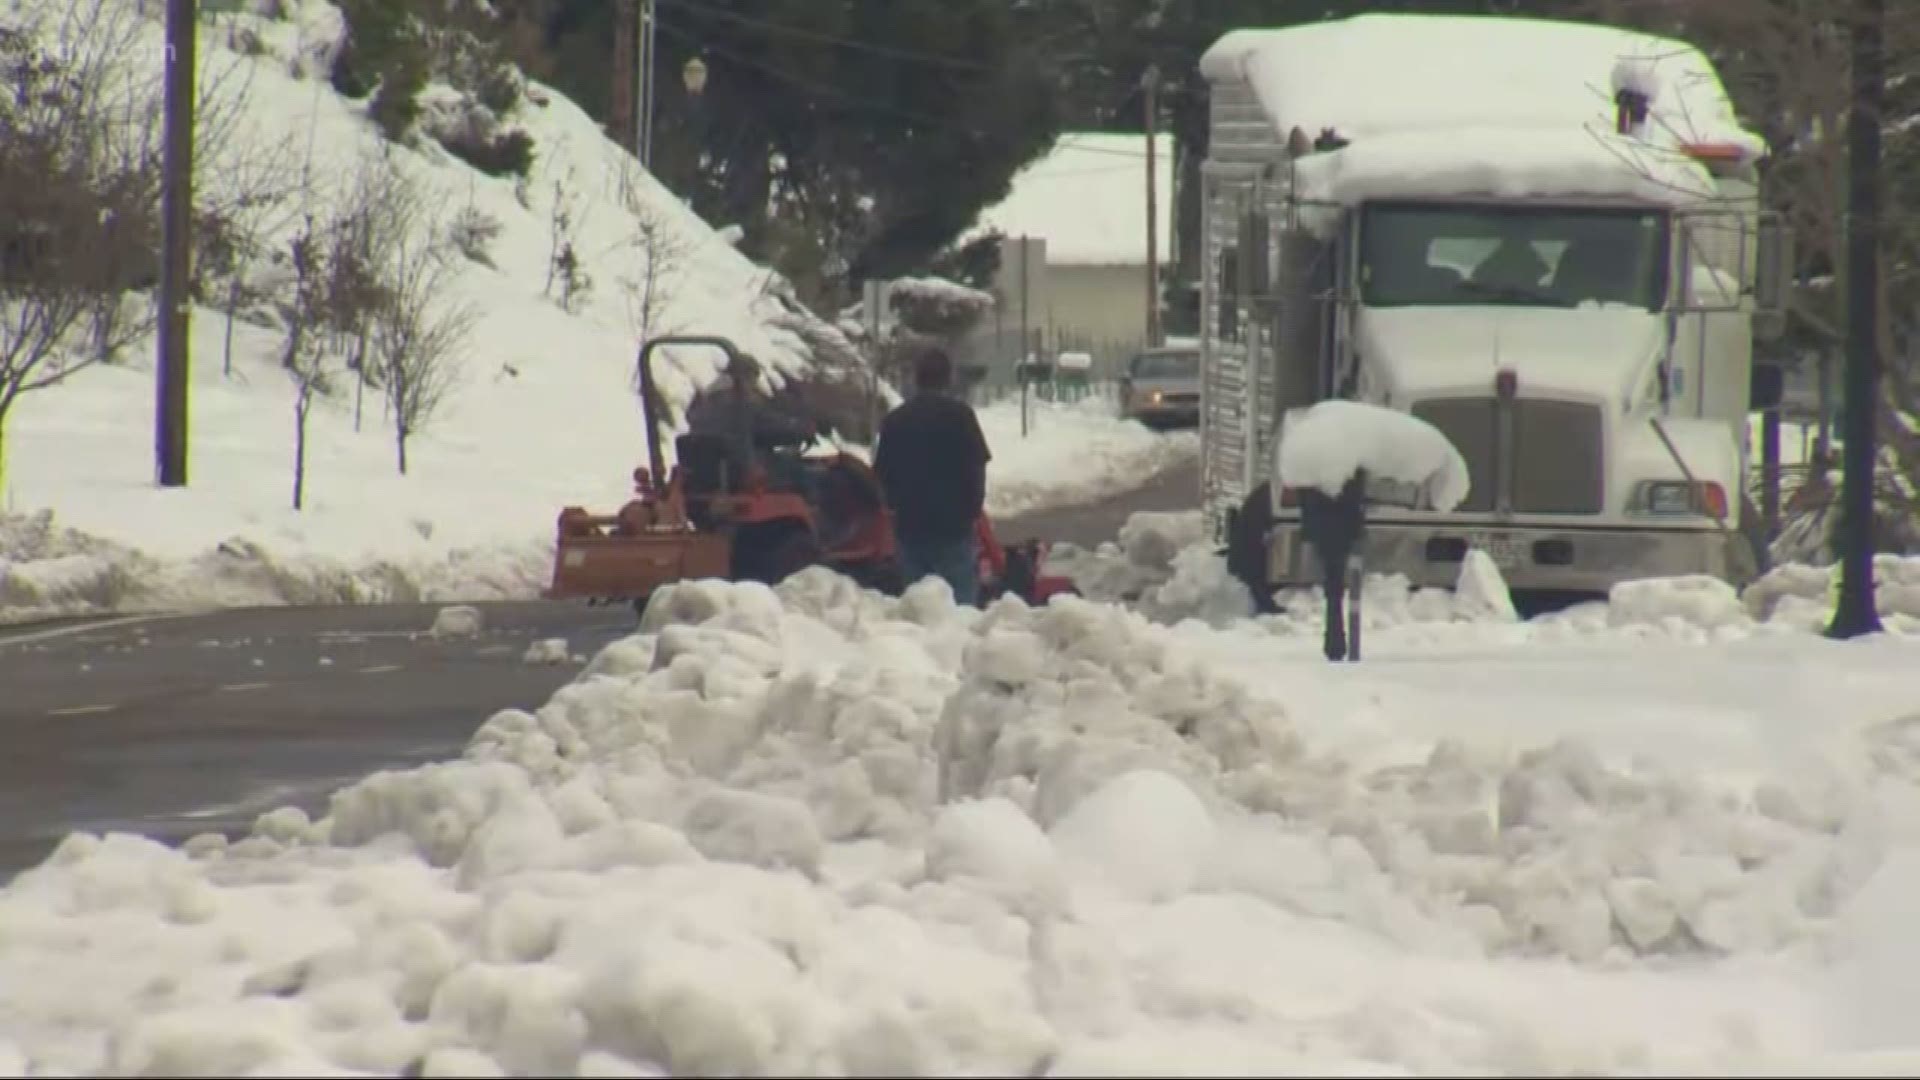 A look at how the Oakridge community is banding together during the winter storm.